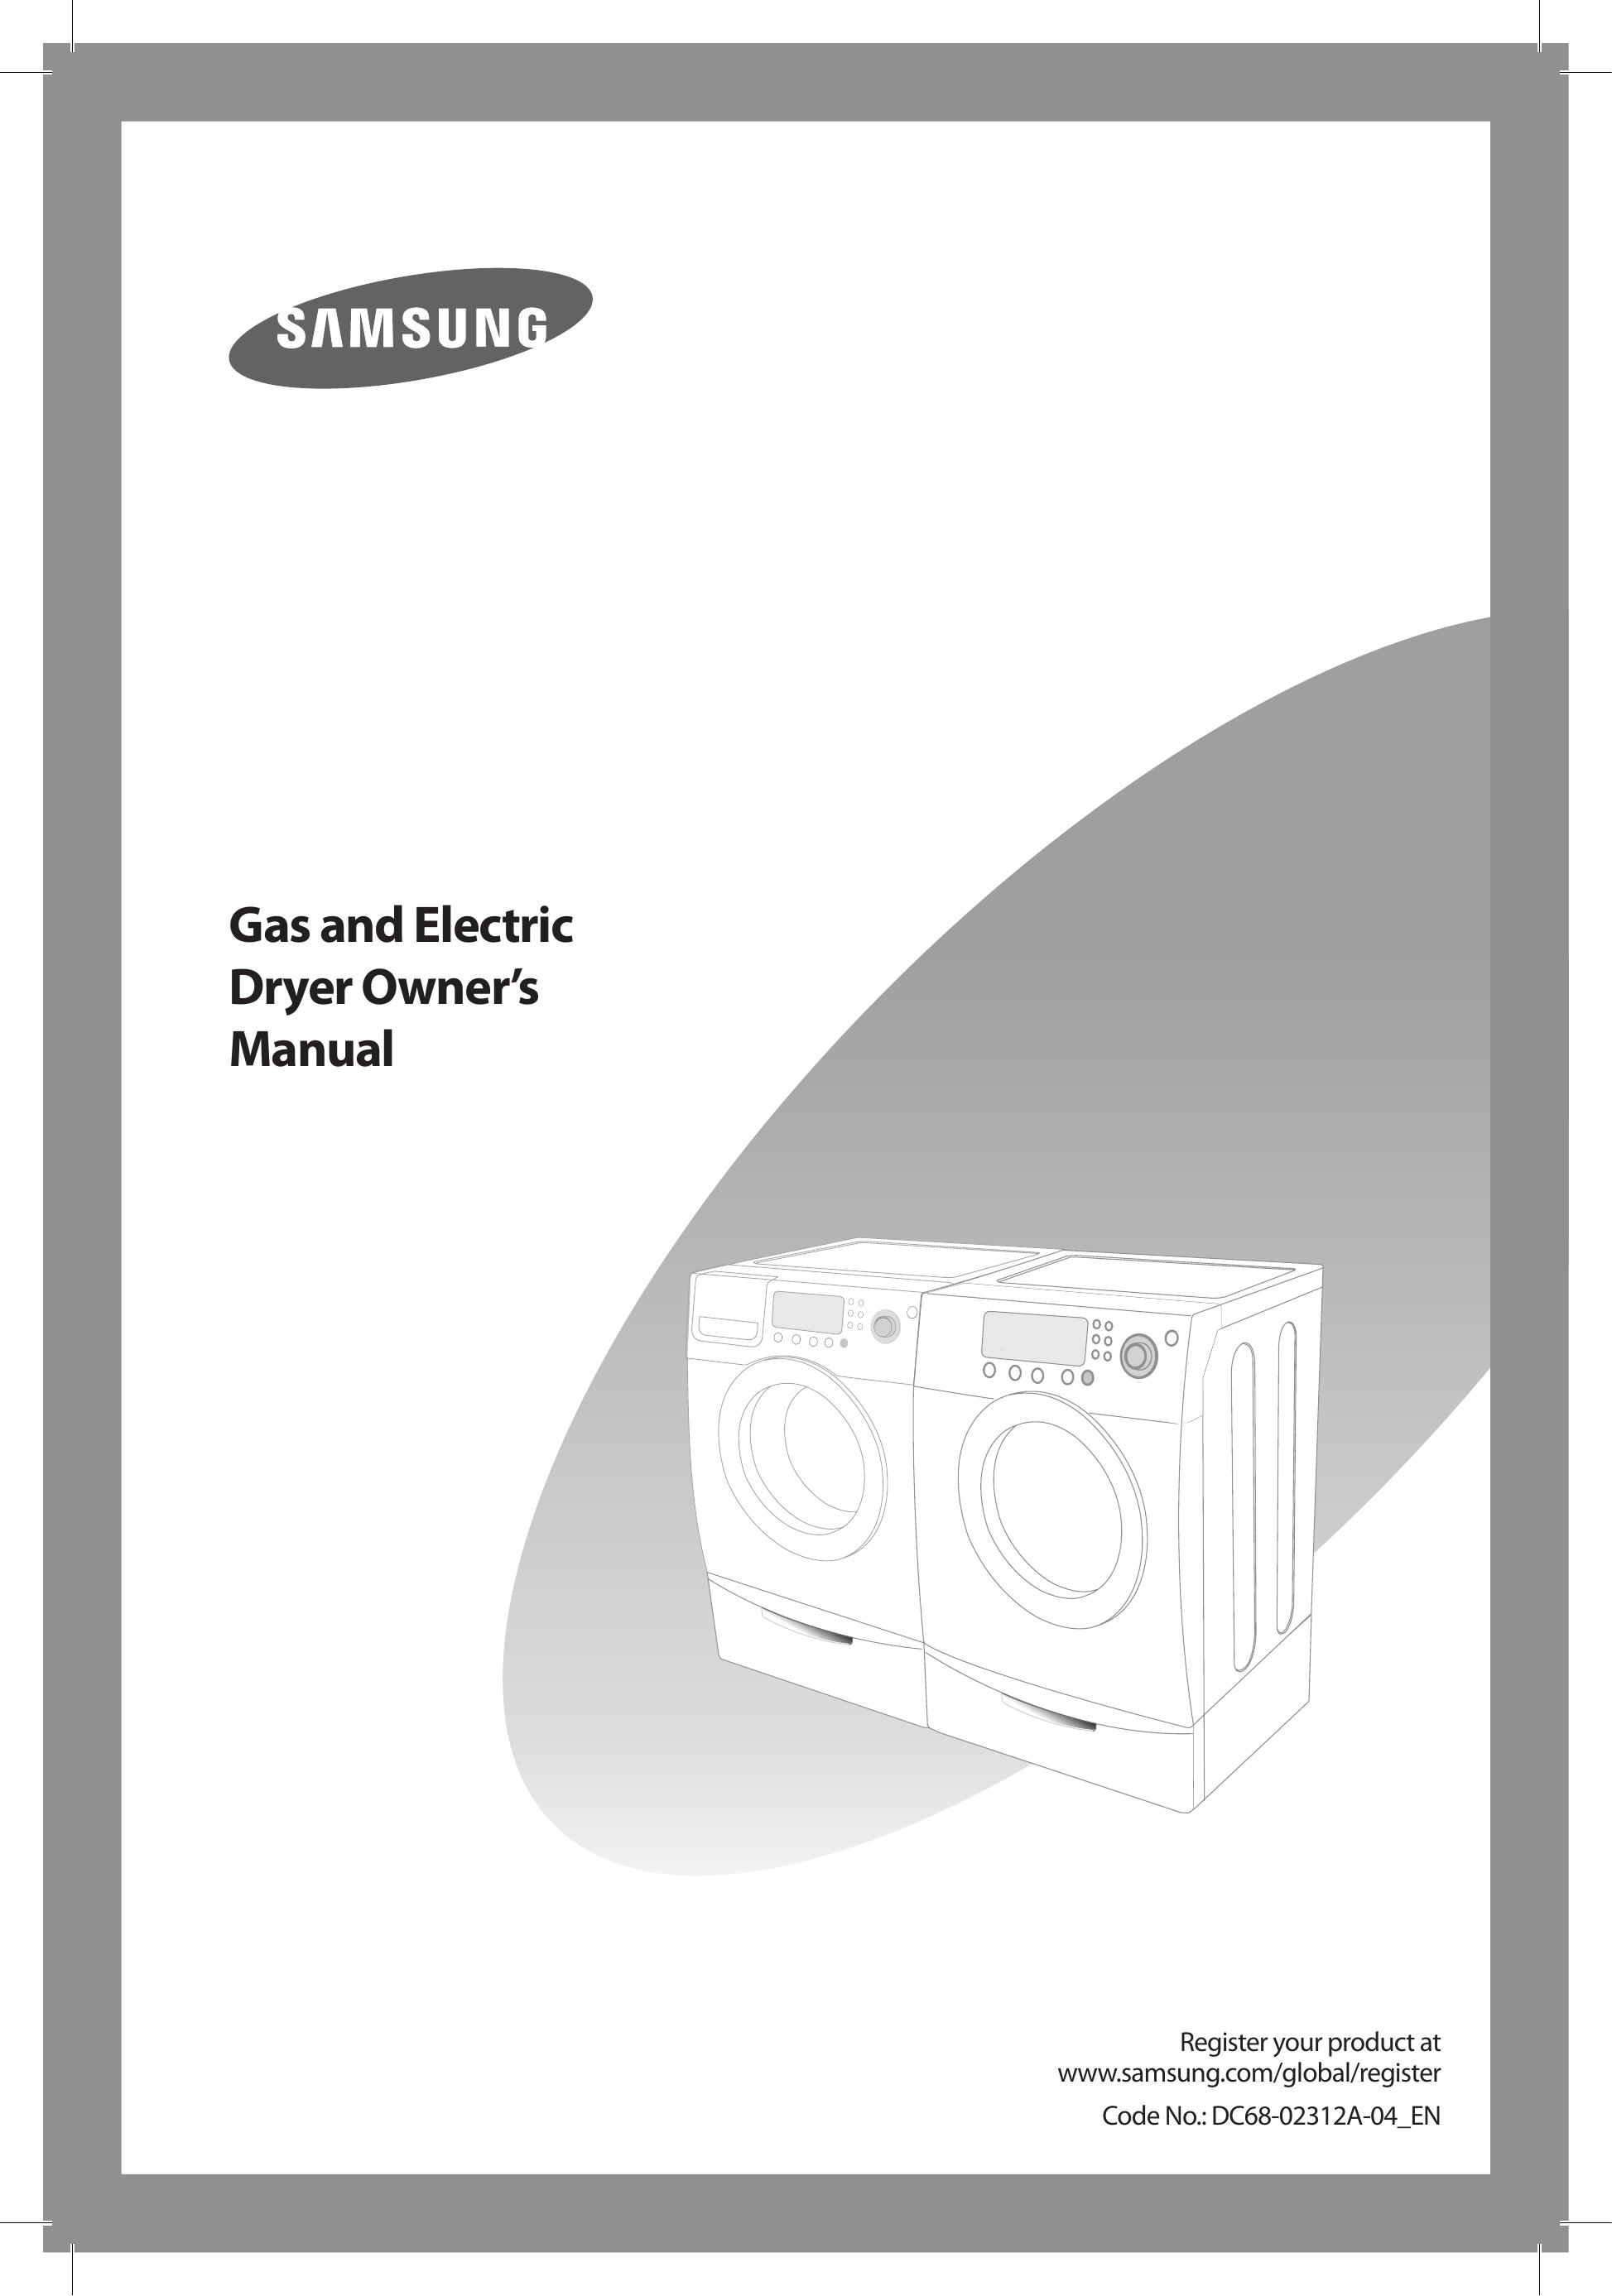 Samsung DC68-02312A-04 Clothes Dryer User Manual